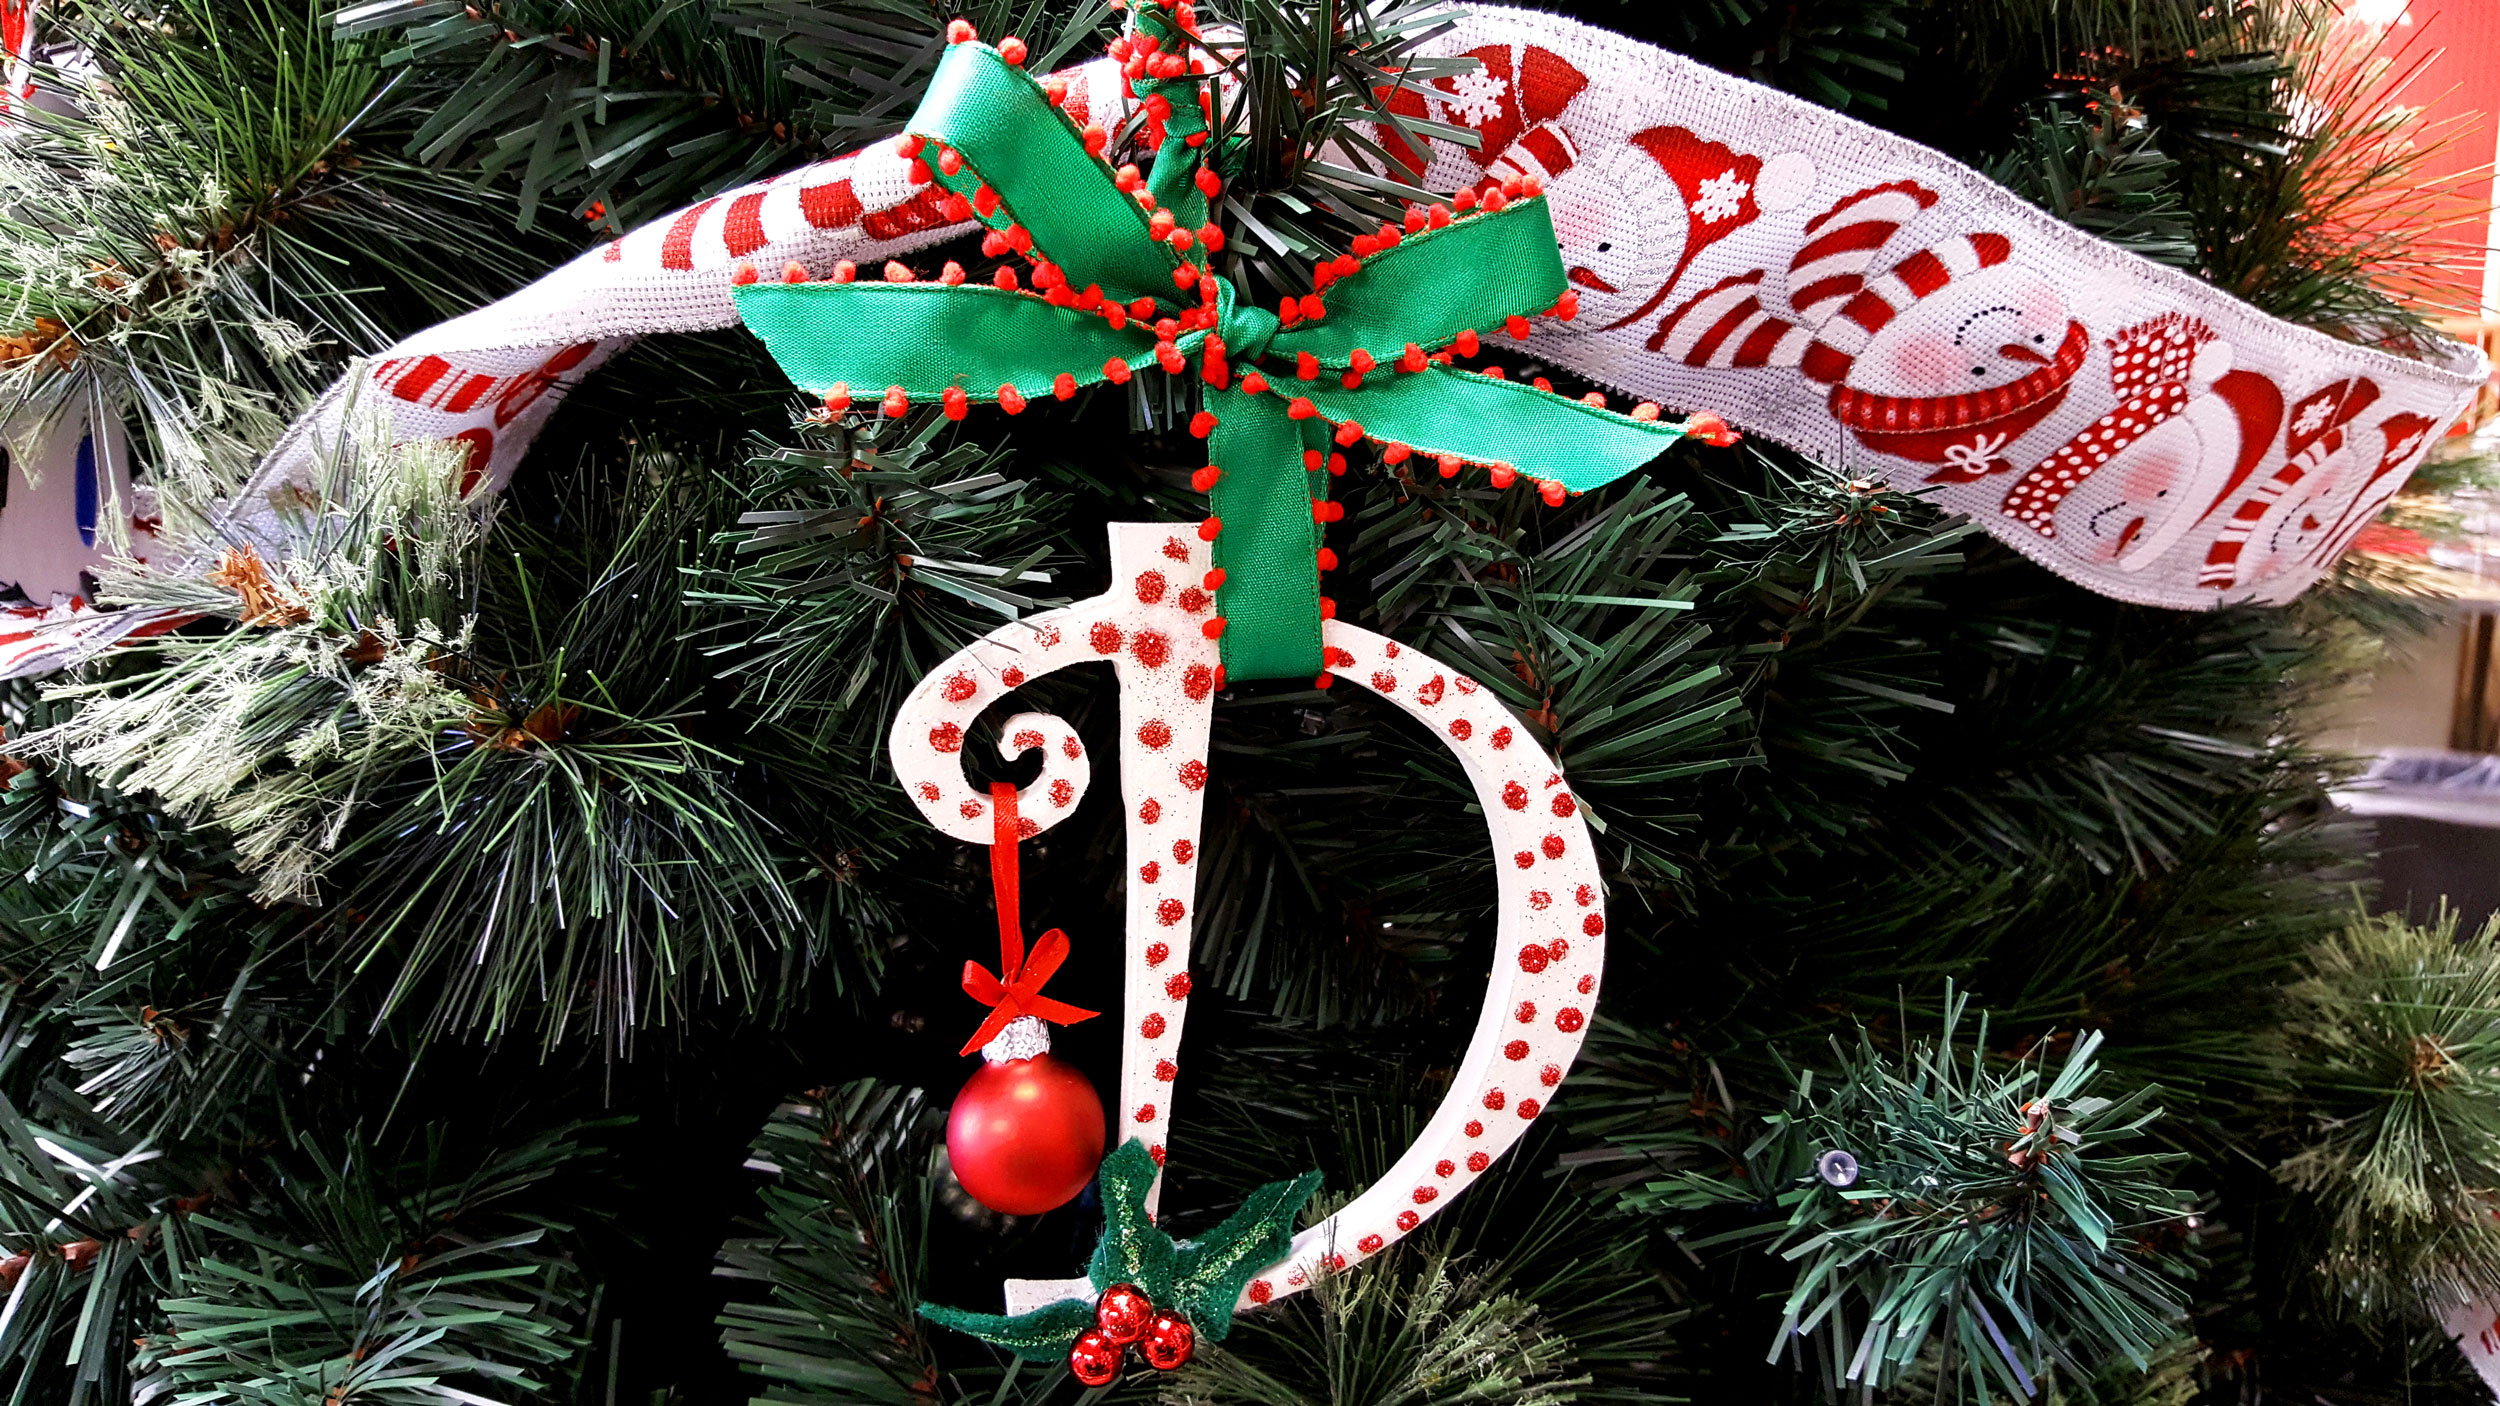 Completed Initial Ornament hanging on a tree. | OrnamentShop.com